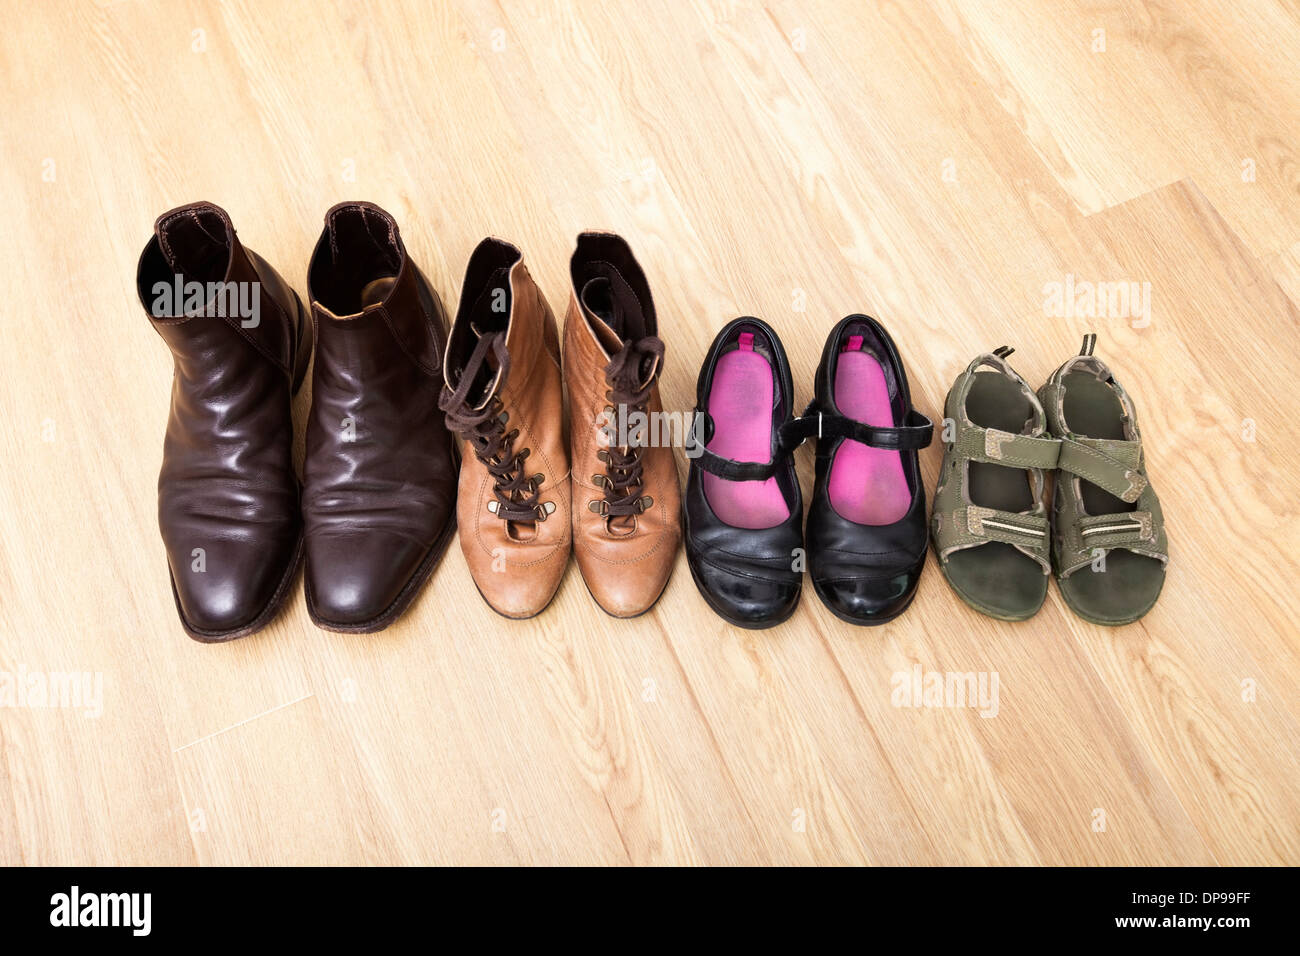 Family shoes placed in a row on hardwood floor Stock Photo